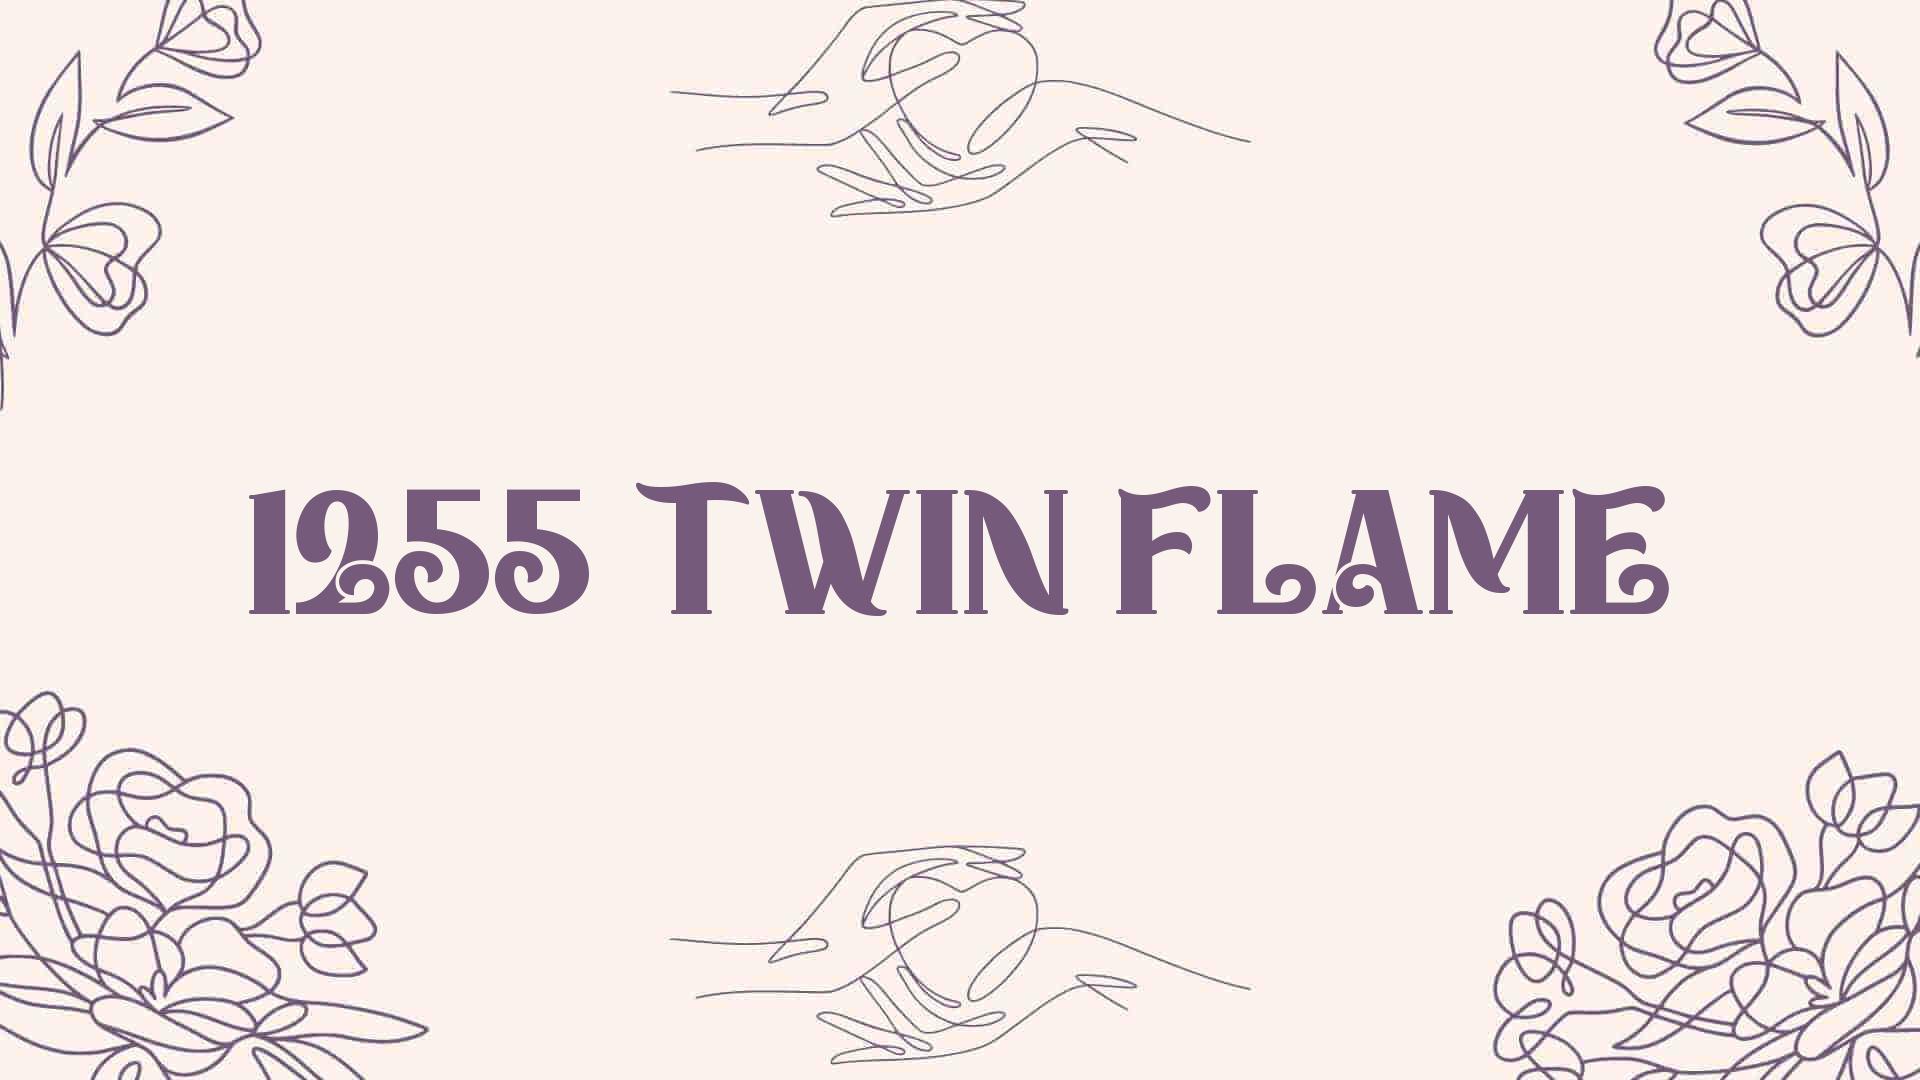 1255 twin flame [ Meaning Revealed ]